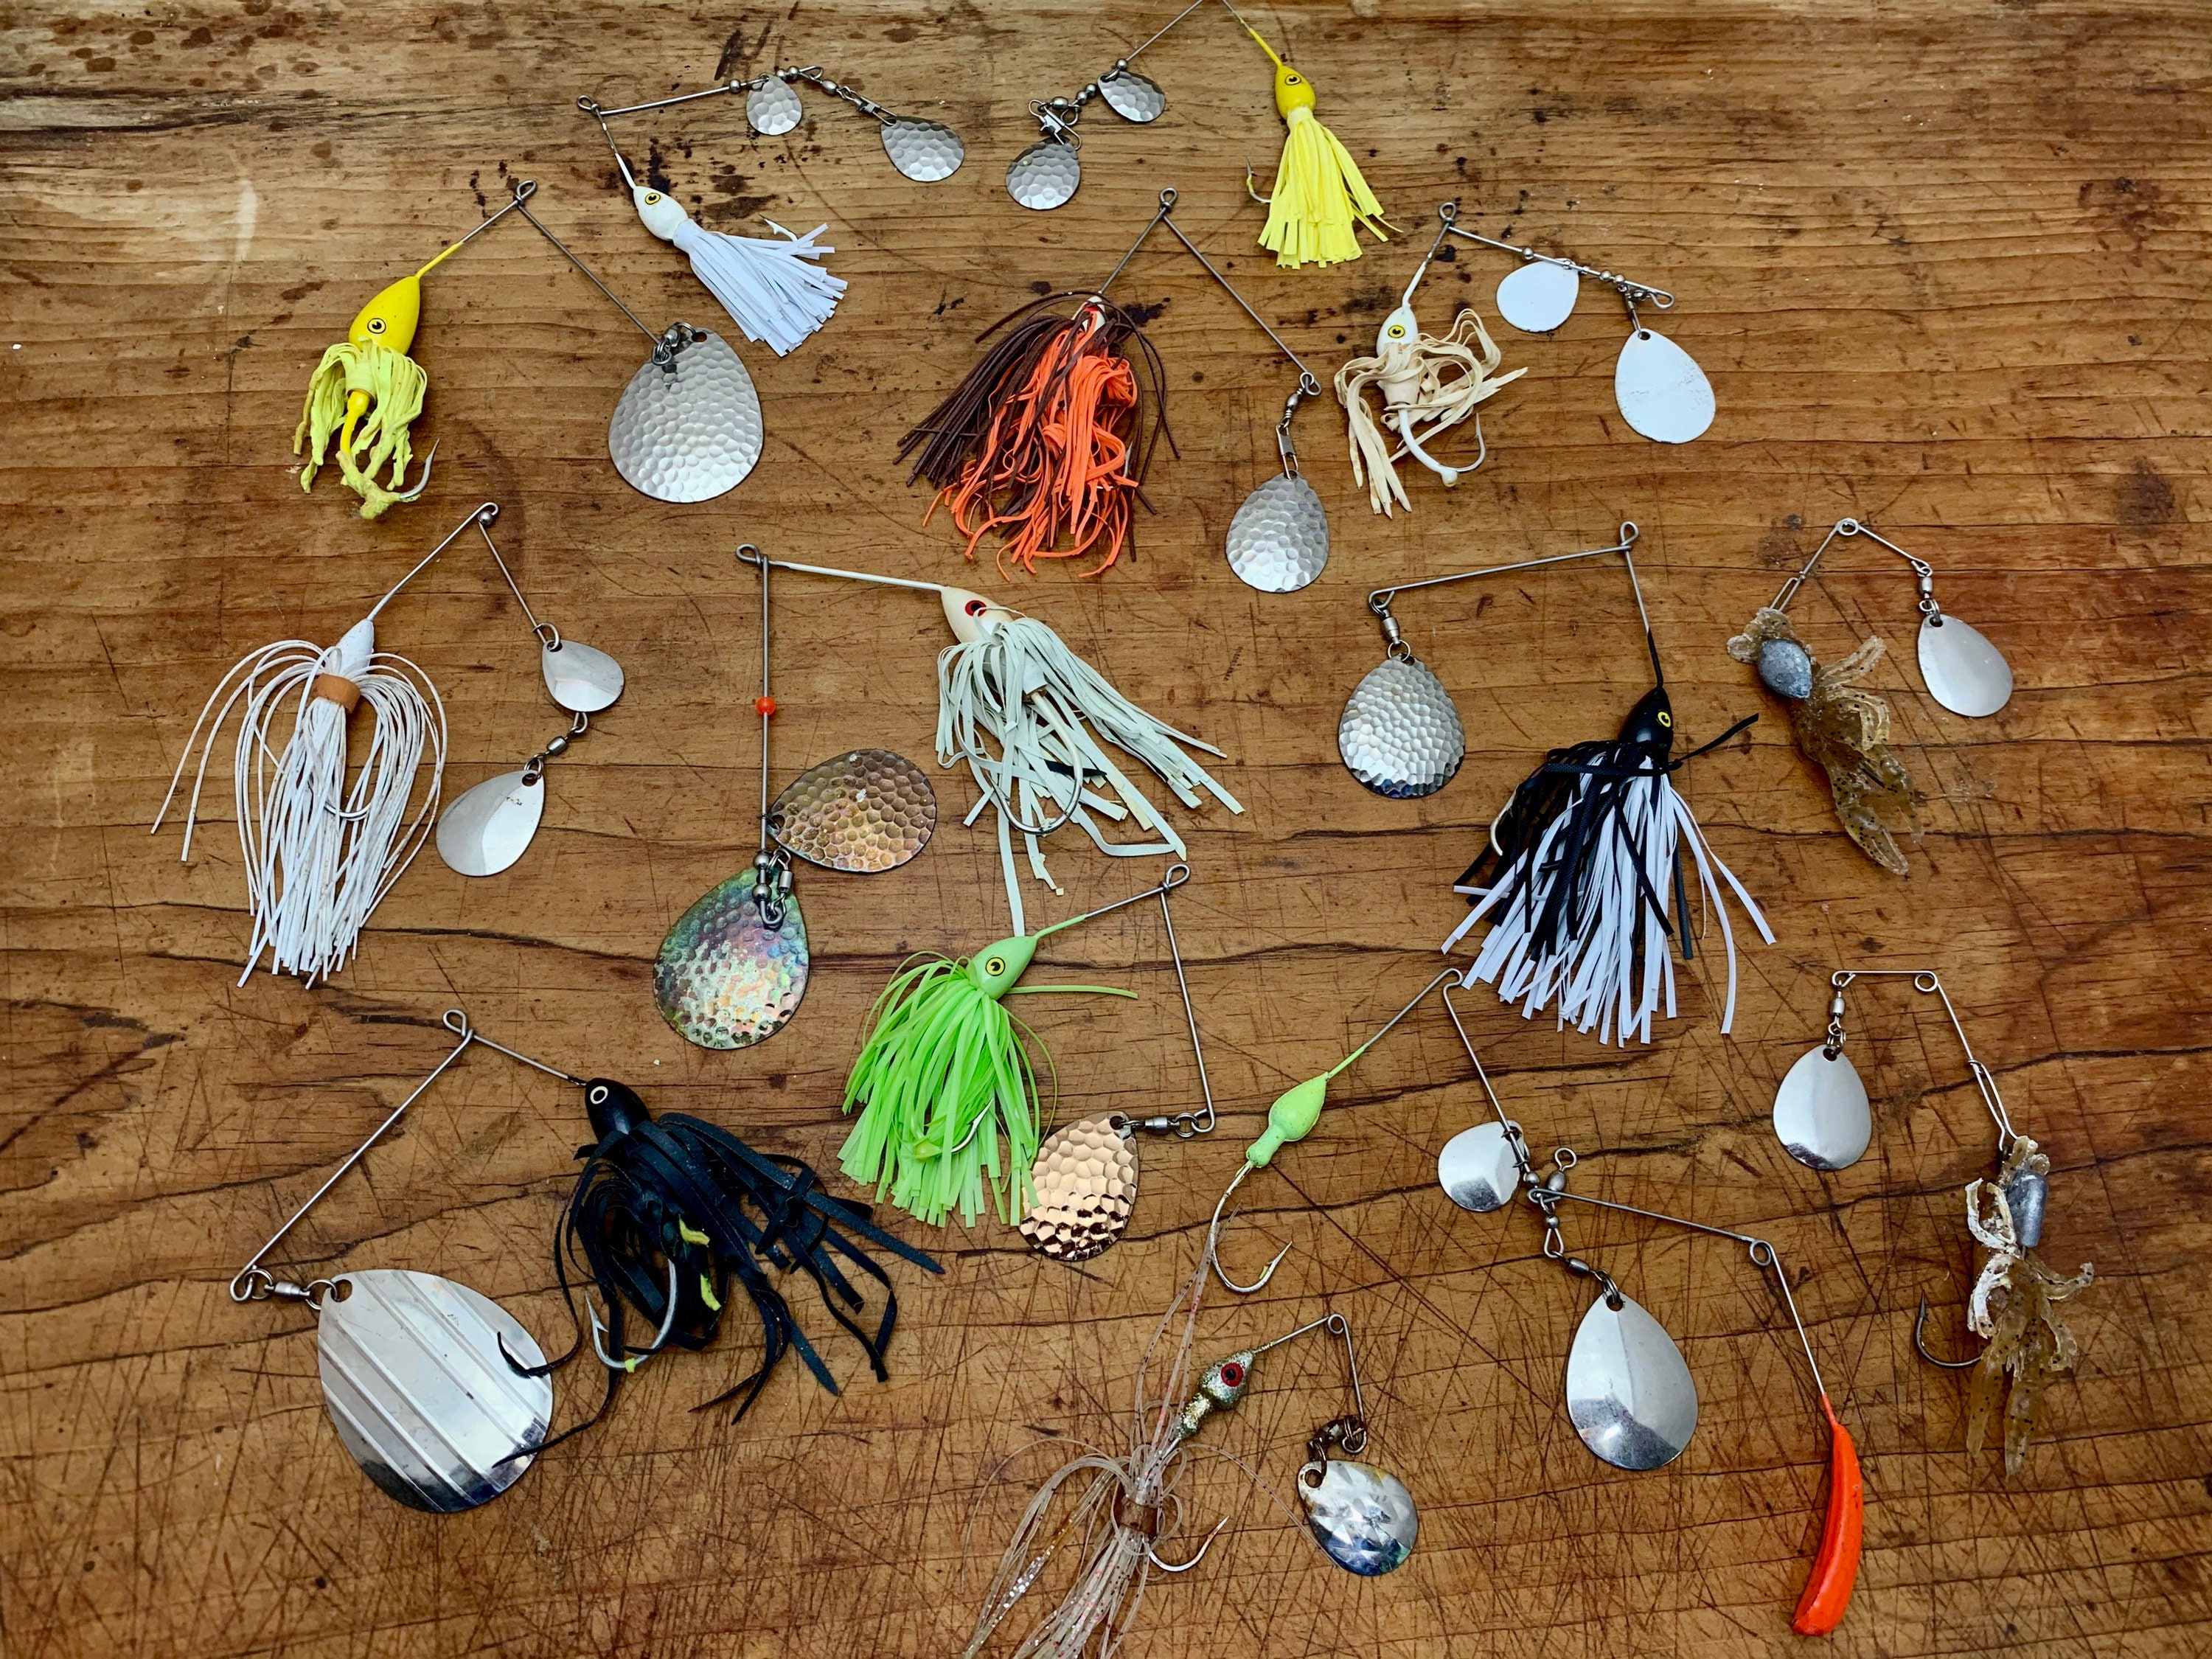 Vintage Spinnerbait Fishing Lures, Lot of 15 With Hooks, Skirts & Silver  Hammered or Shiny Metal Spoons, Bass Carp Pike 